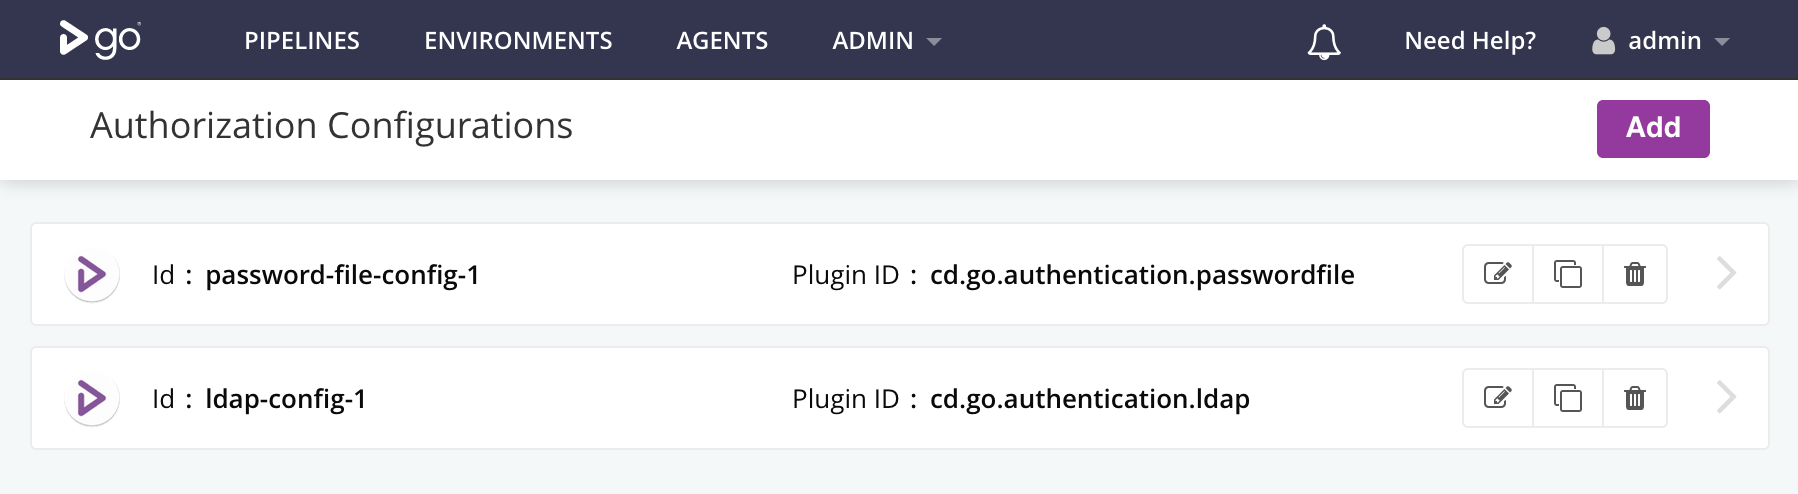 Shows two authorization configurations